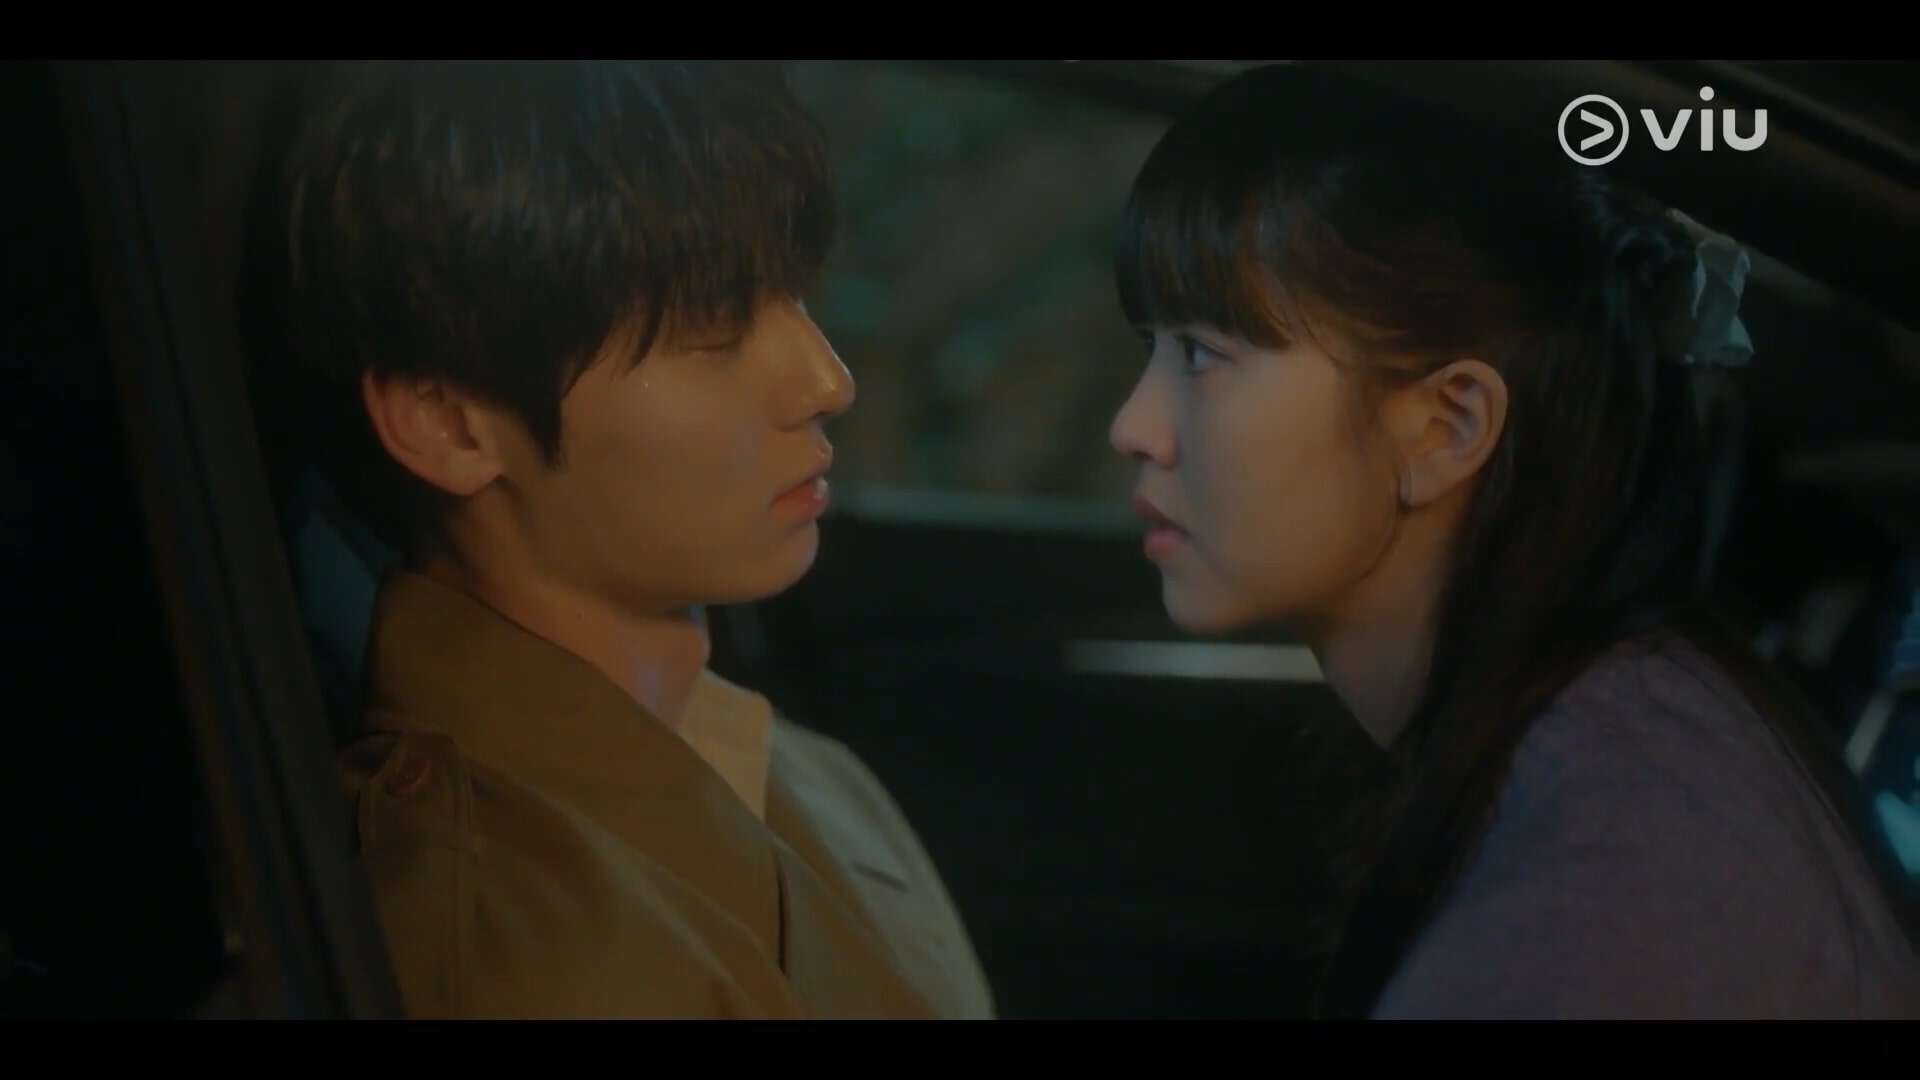 My Lovely Liar Episode 5: Release Date, Preview & Streaming Guide